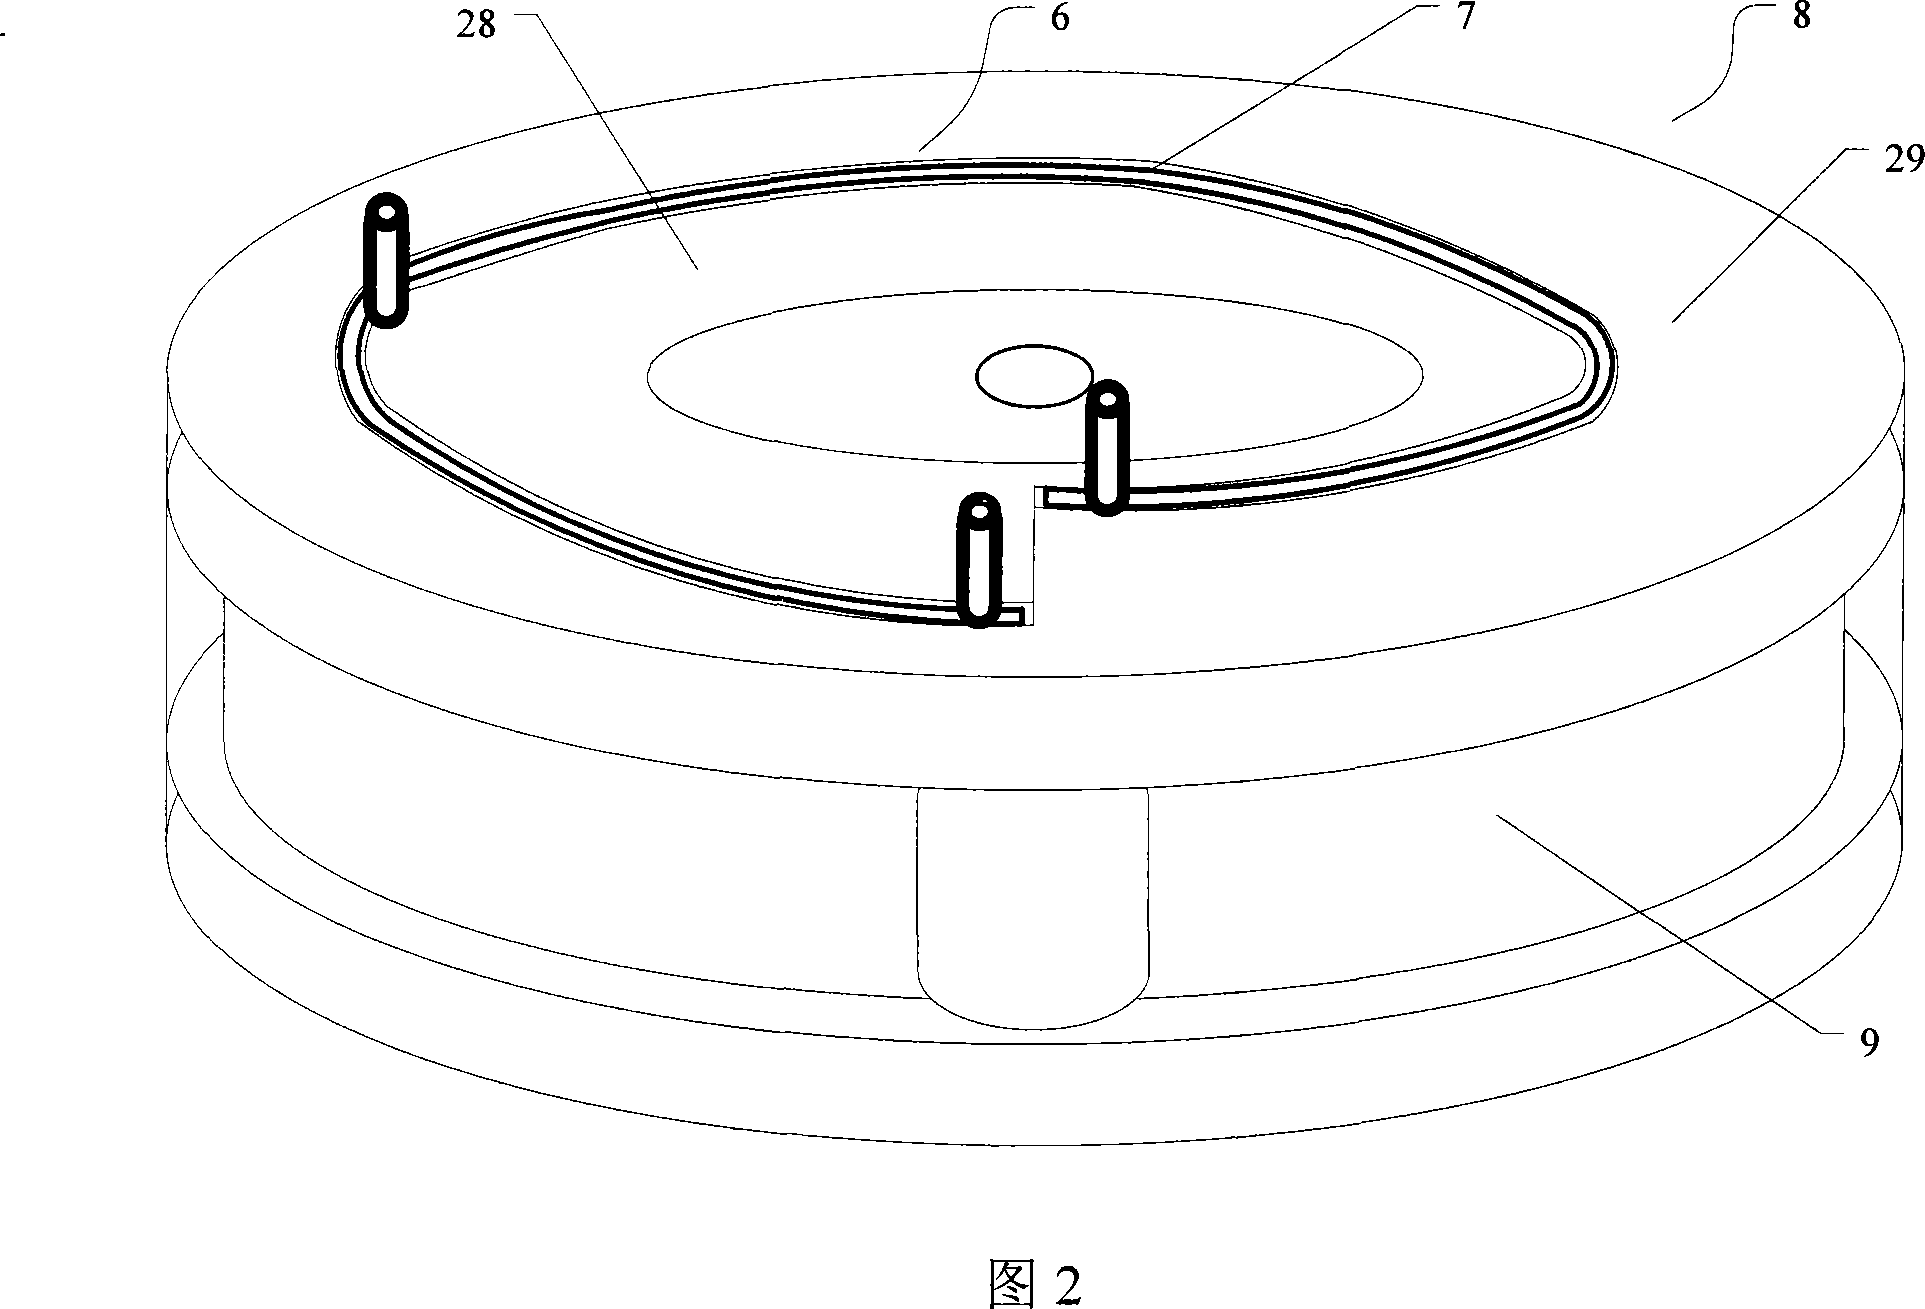 Separator disk on multi-cell component mix liquid separating system and application method of the same